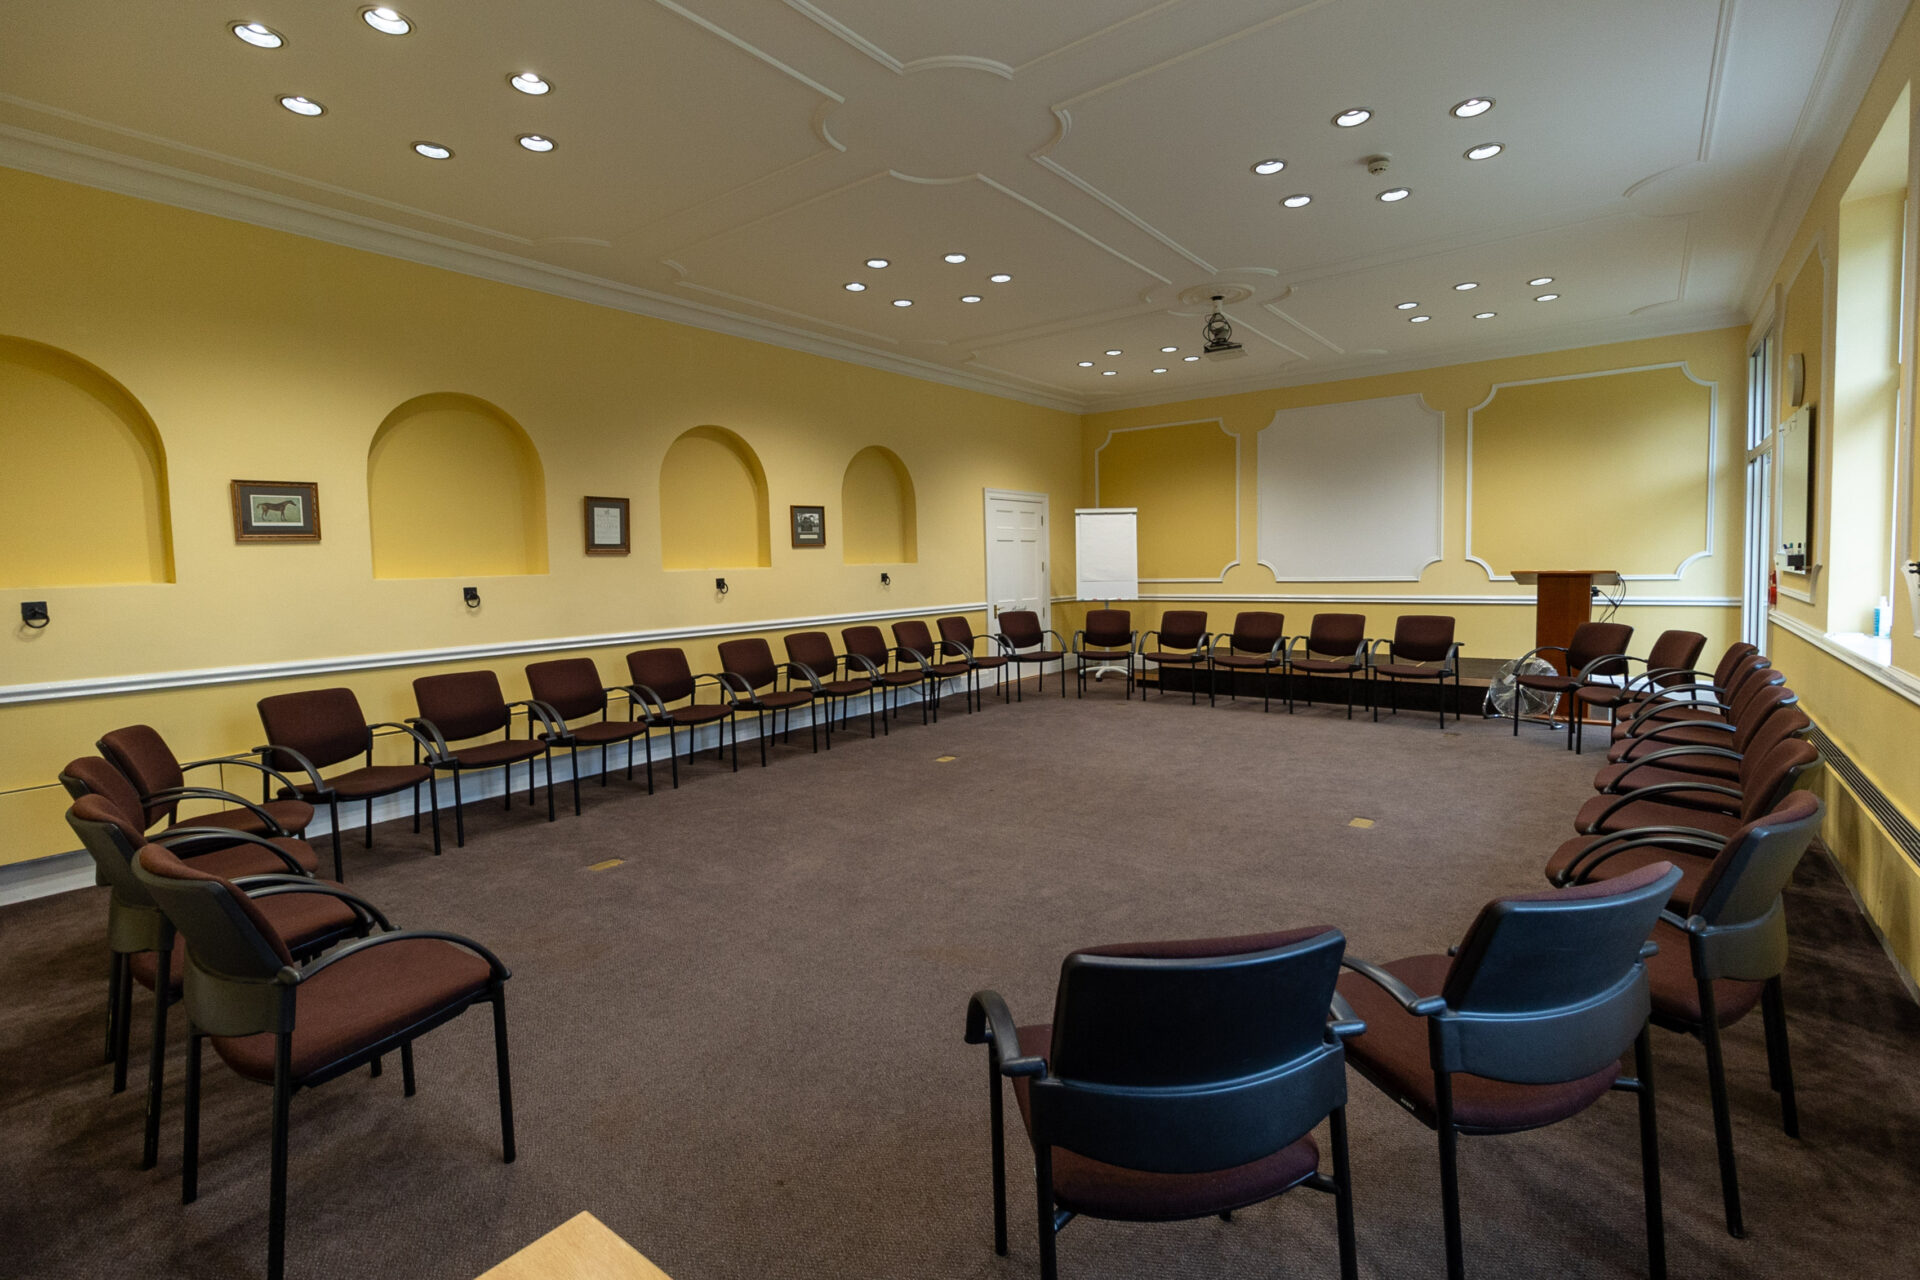 The Sandby conference room, set up in a circle layout to accommodate up to 30 people.